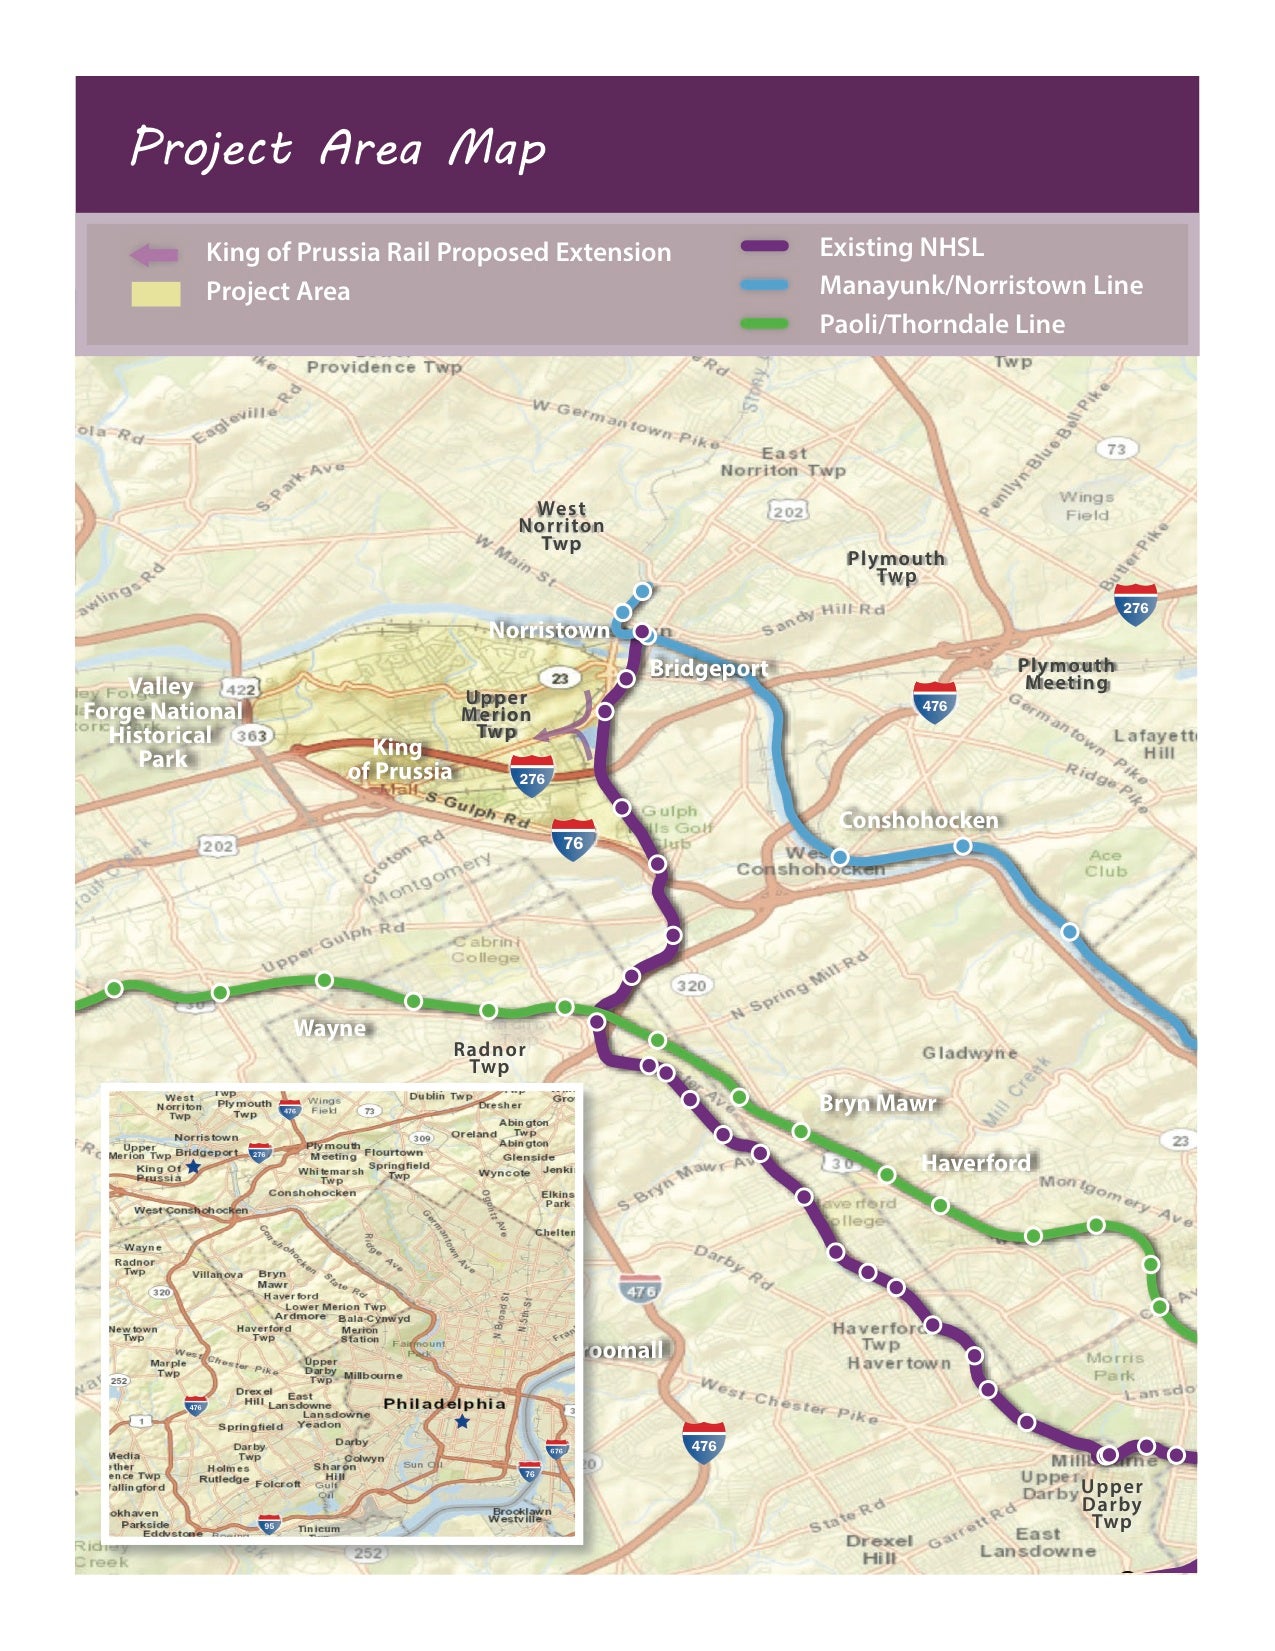 King of Prussia rail project area map